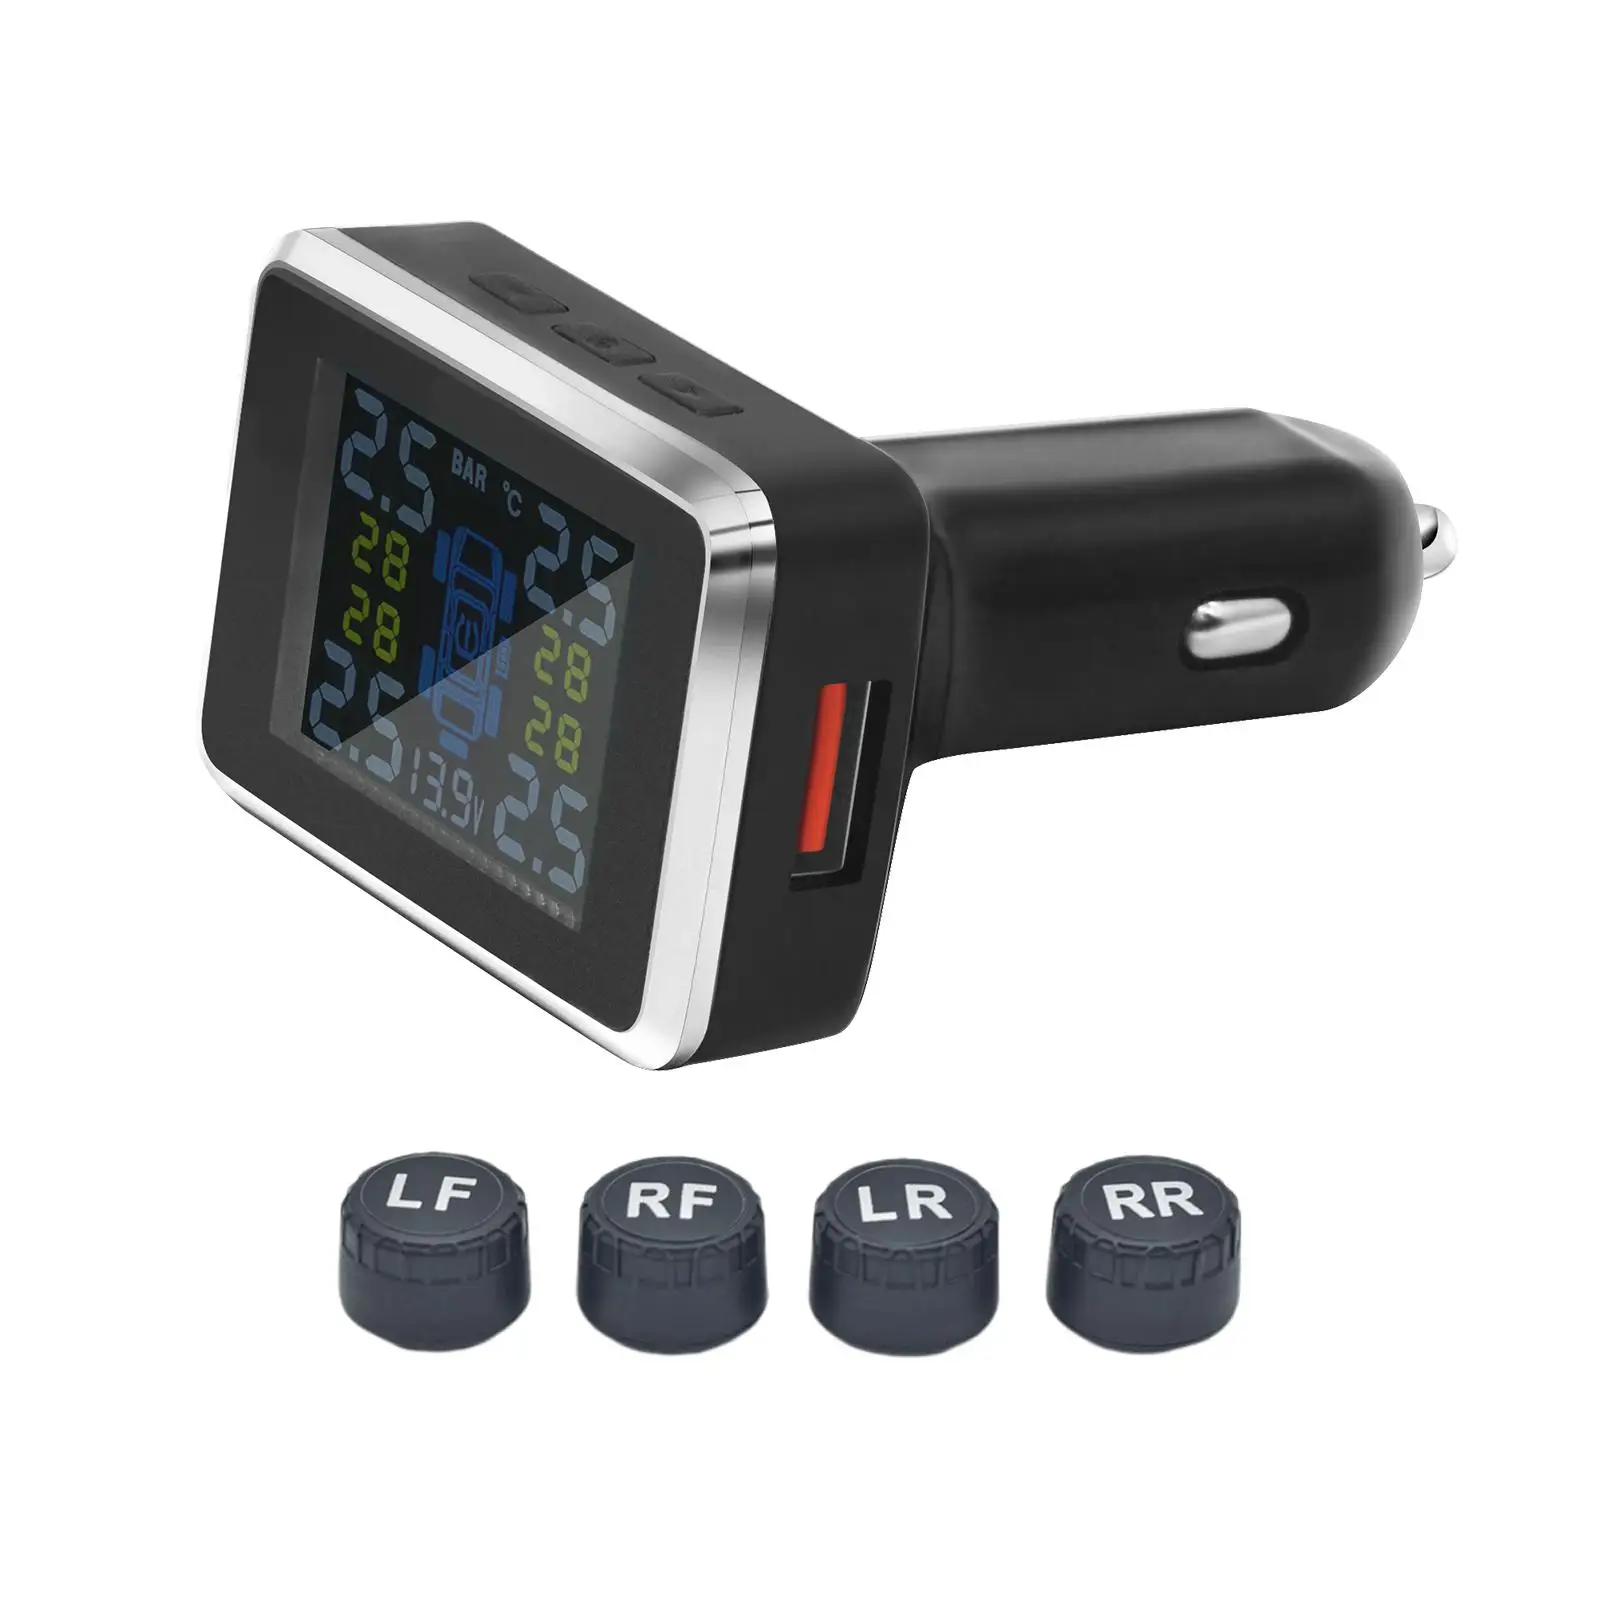 Car Tire Pressure Monitoring System TPMS W/ 4x External Sensors LCD Display Auto Alarm Real Time Monitor Fit for Sedans MPV RV